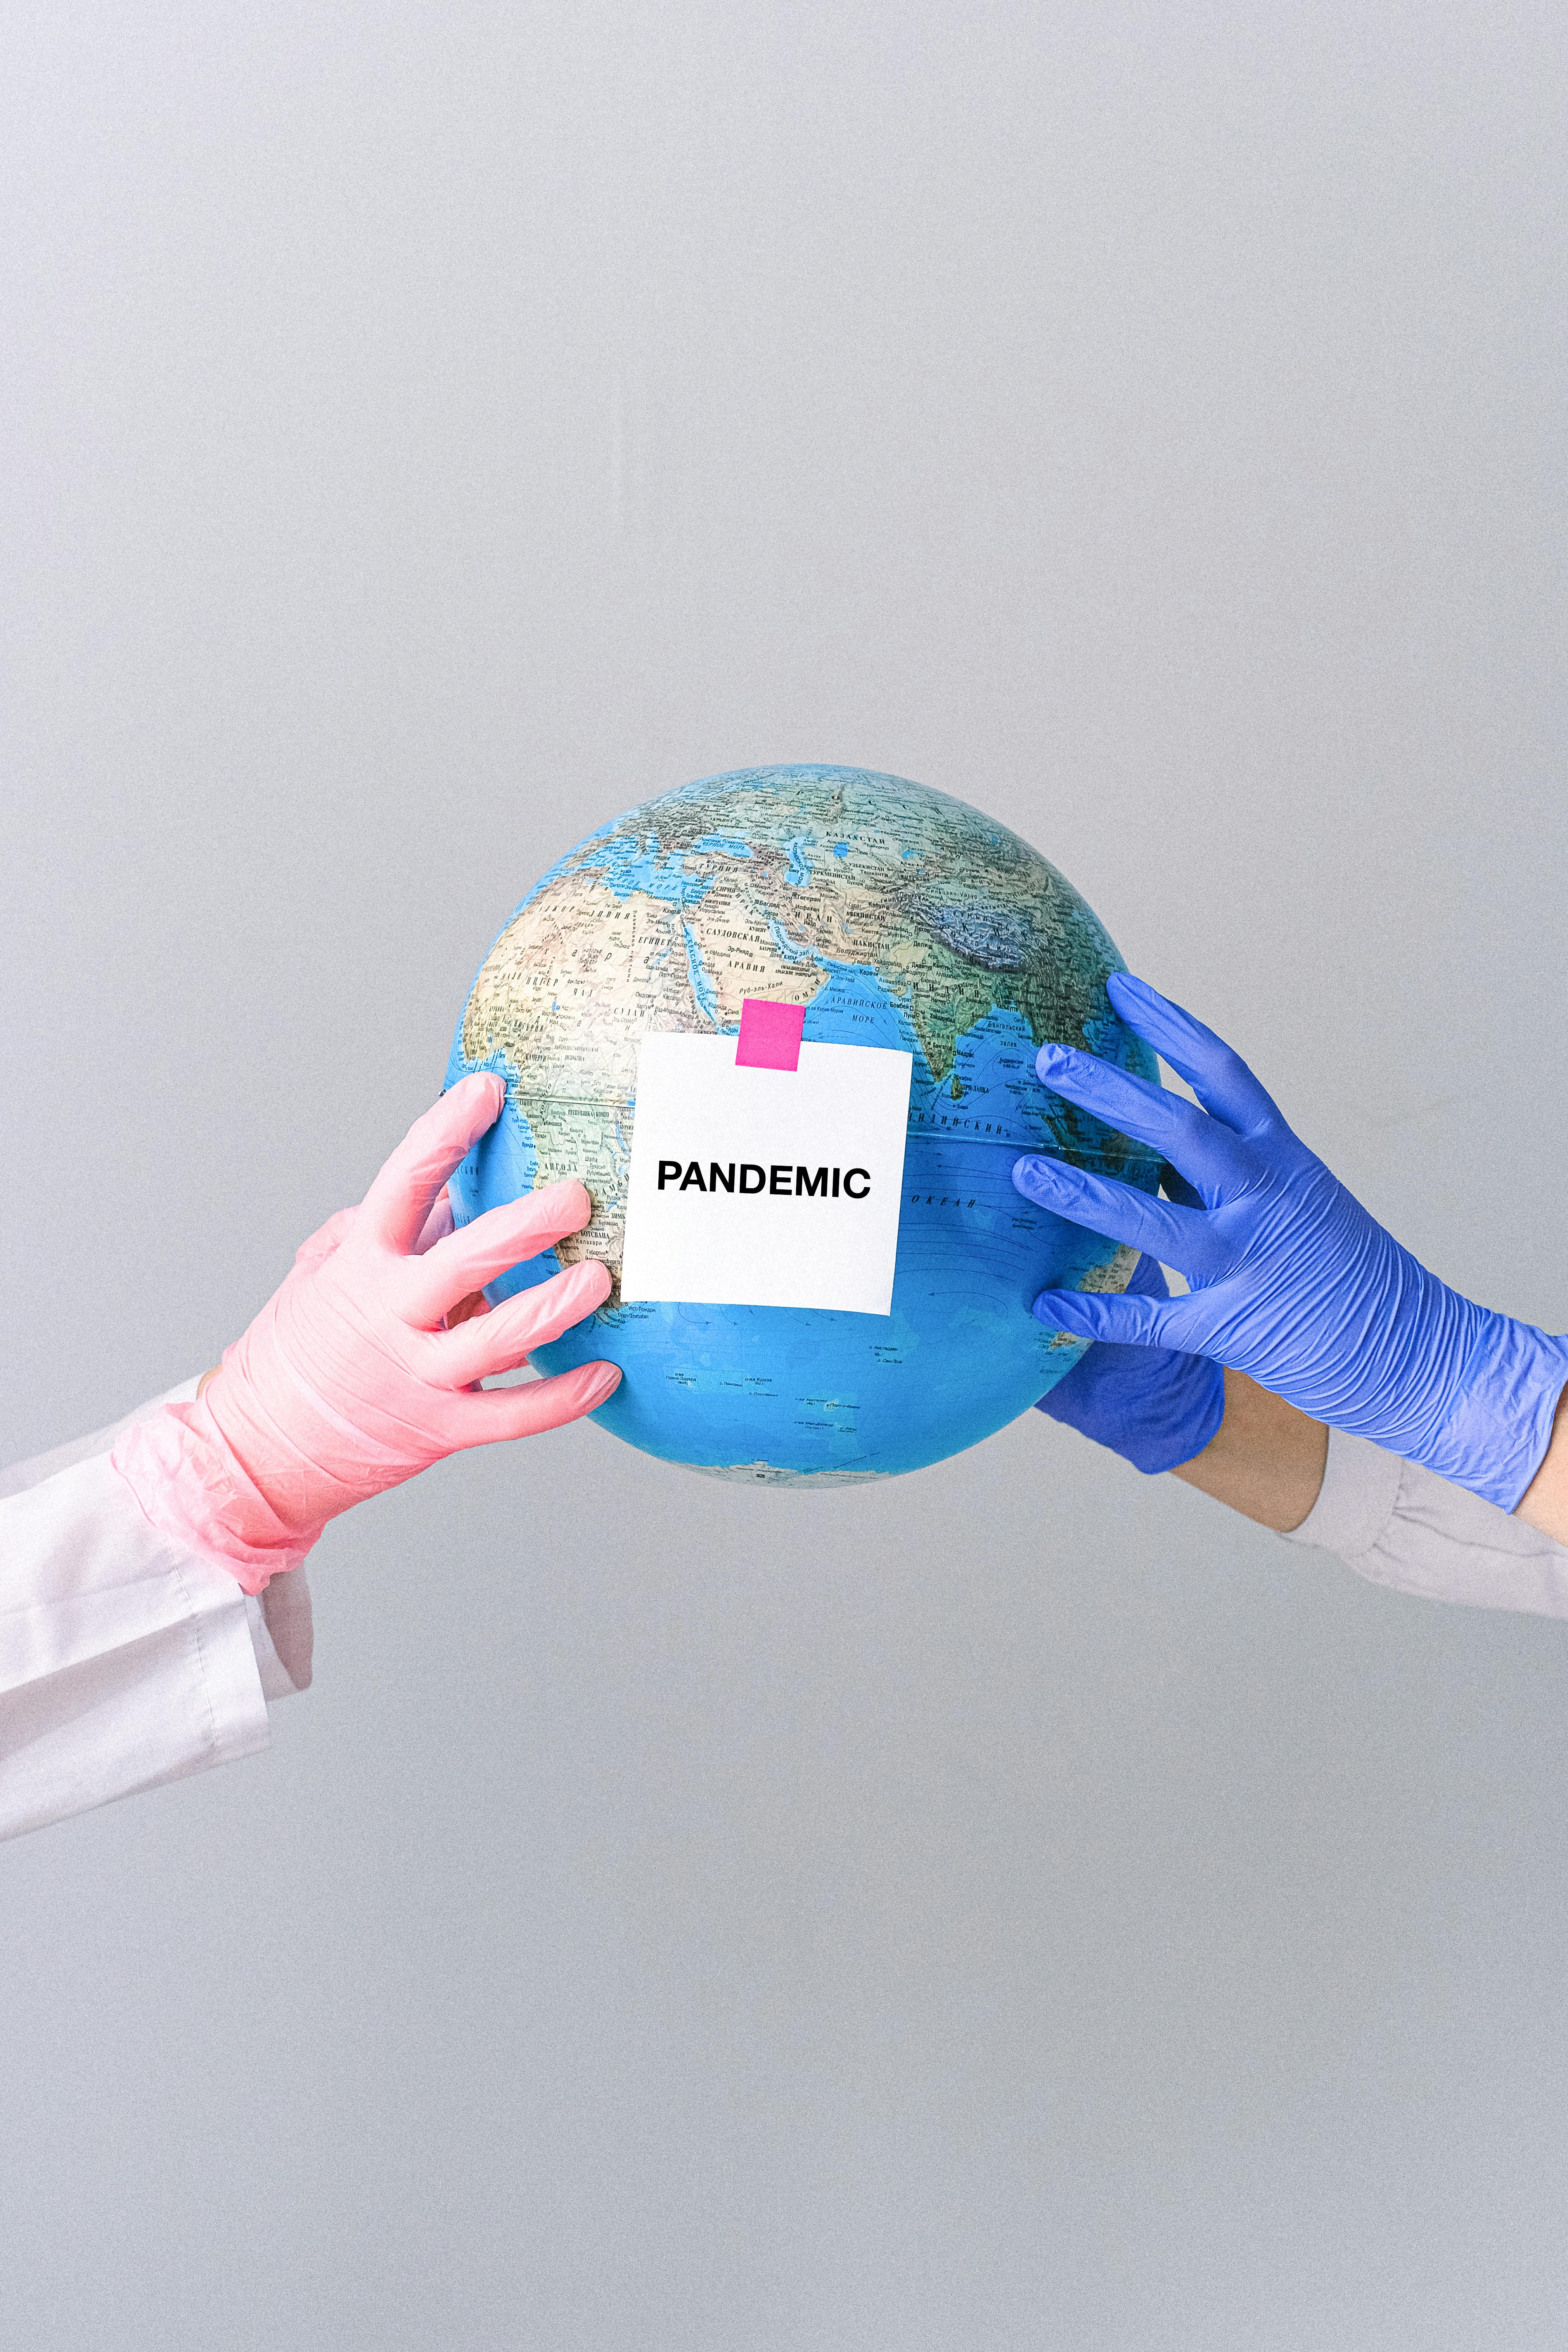 hands with latex gloves holding a globe